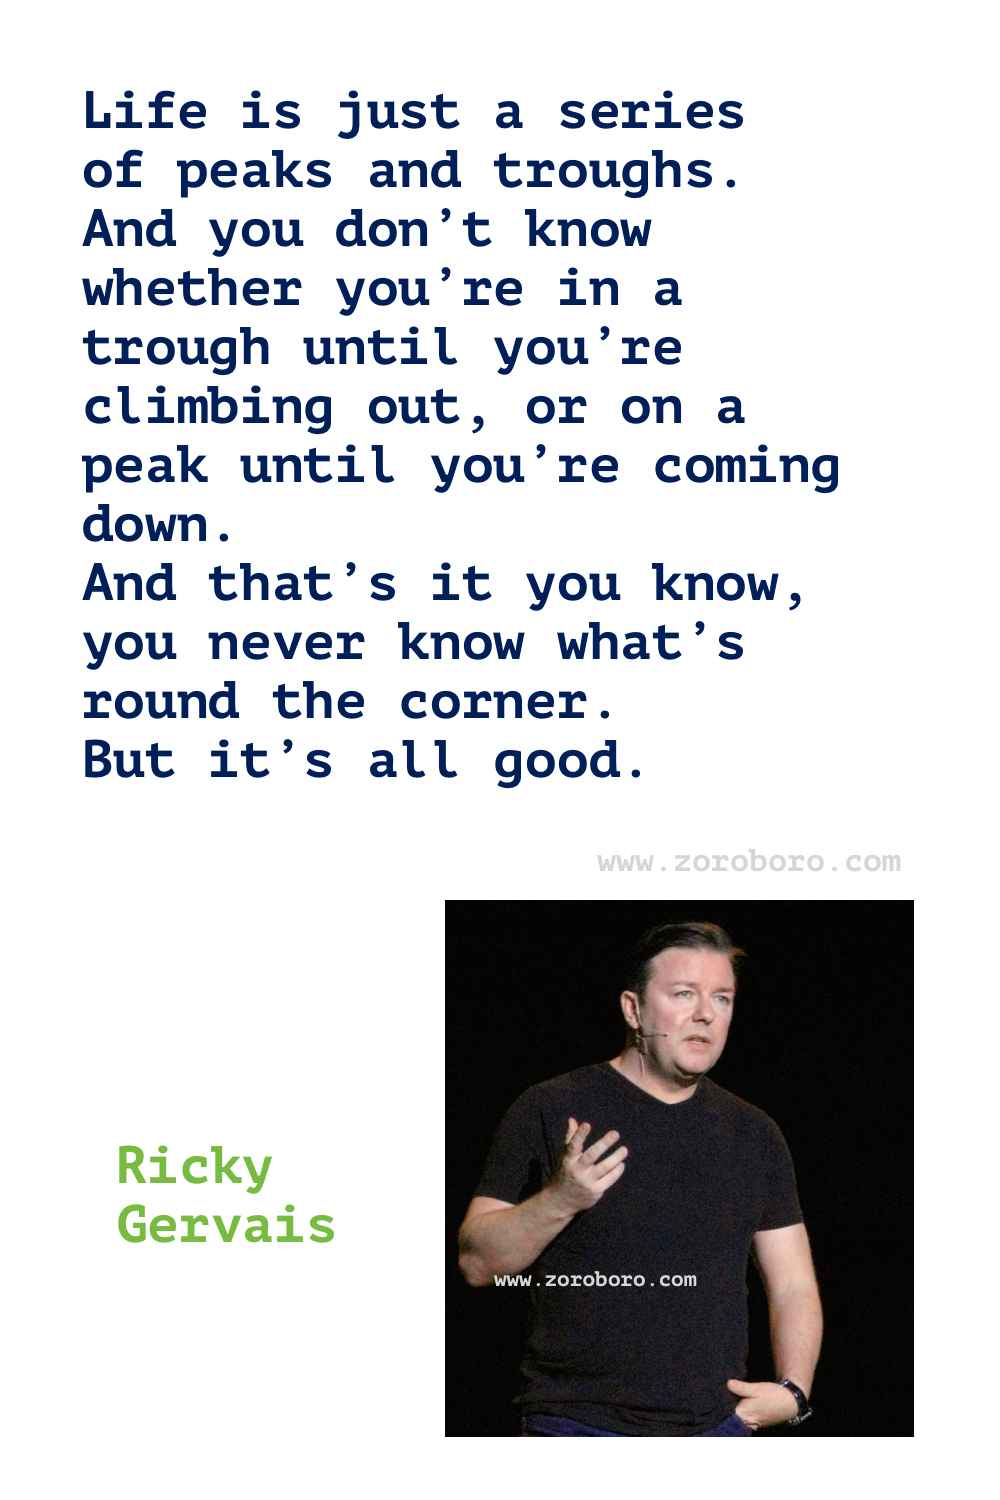 Ricky Gervais Quotes, Ricky Gervais on Religion, Life, Atheism, Death & Science. Ricky Gervais Humor Quotes.Ricky Gervais Humanity & Animals Quotes, Ricky Gervais Quotes. Ricky Gervais